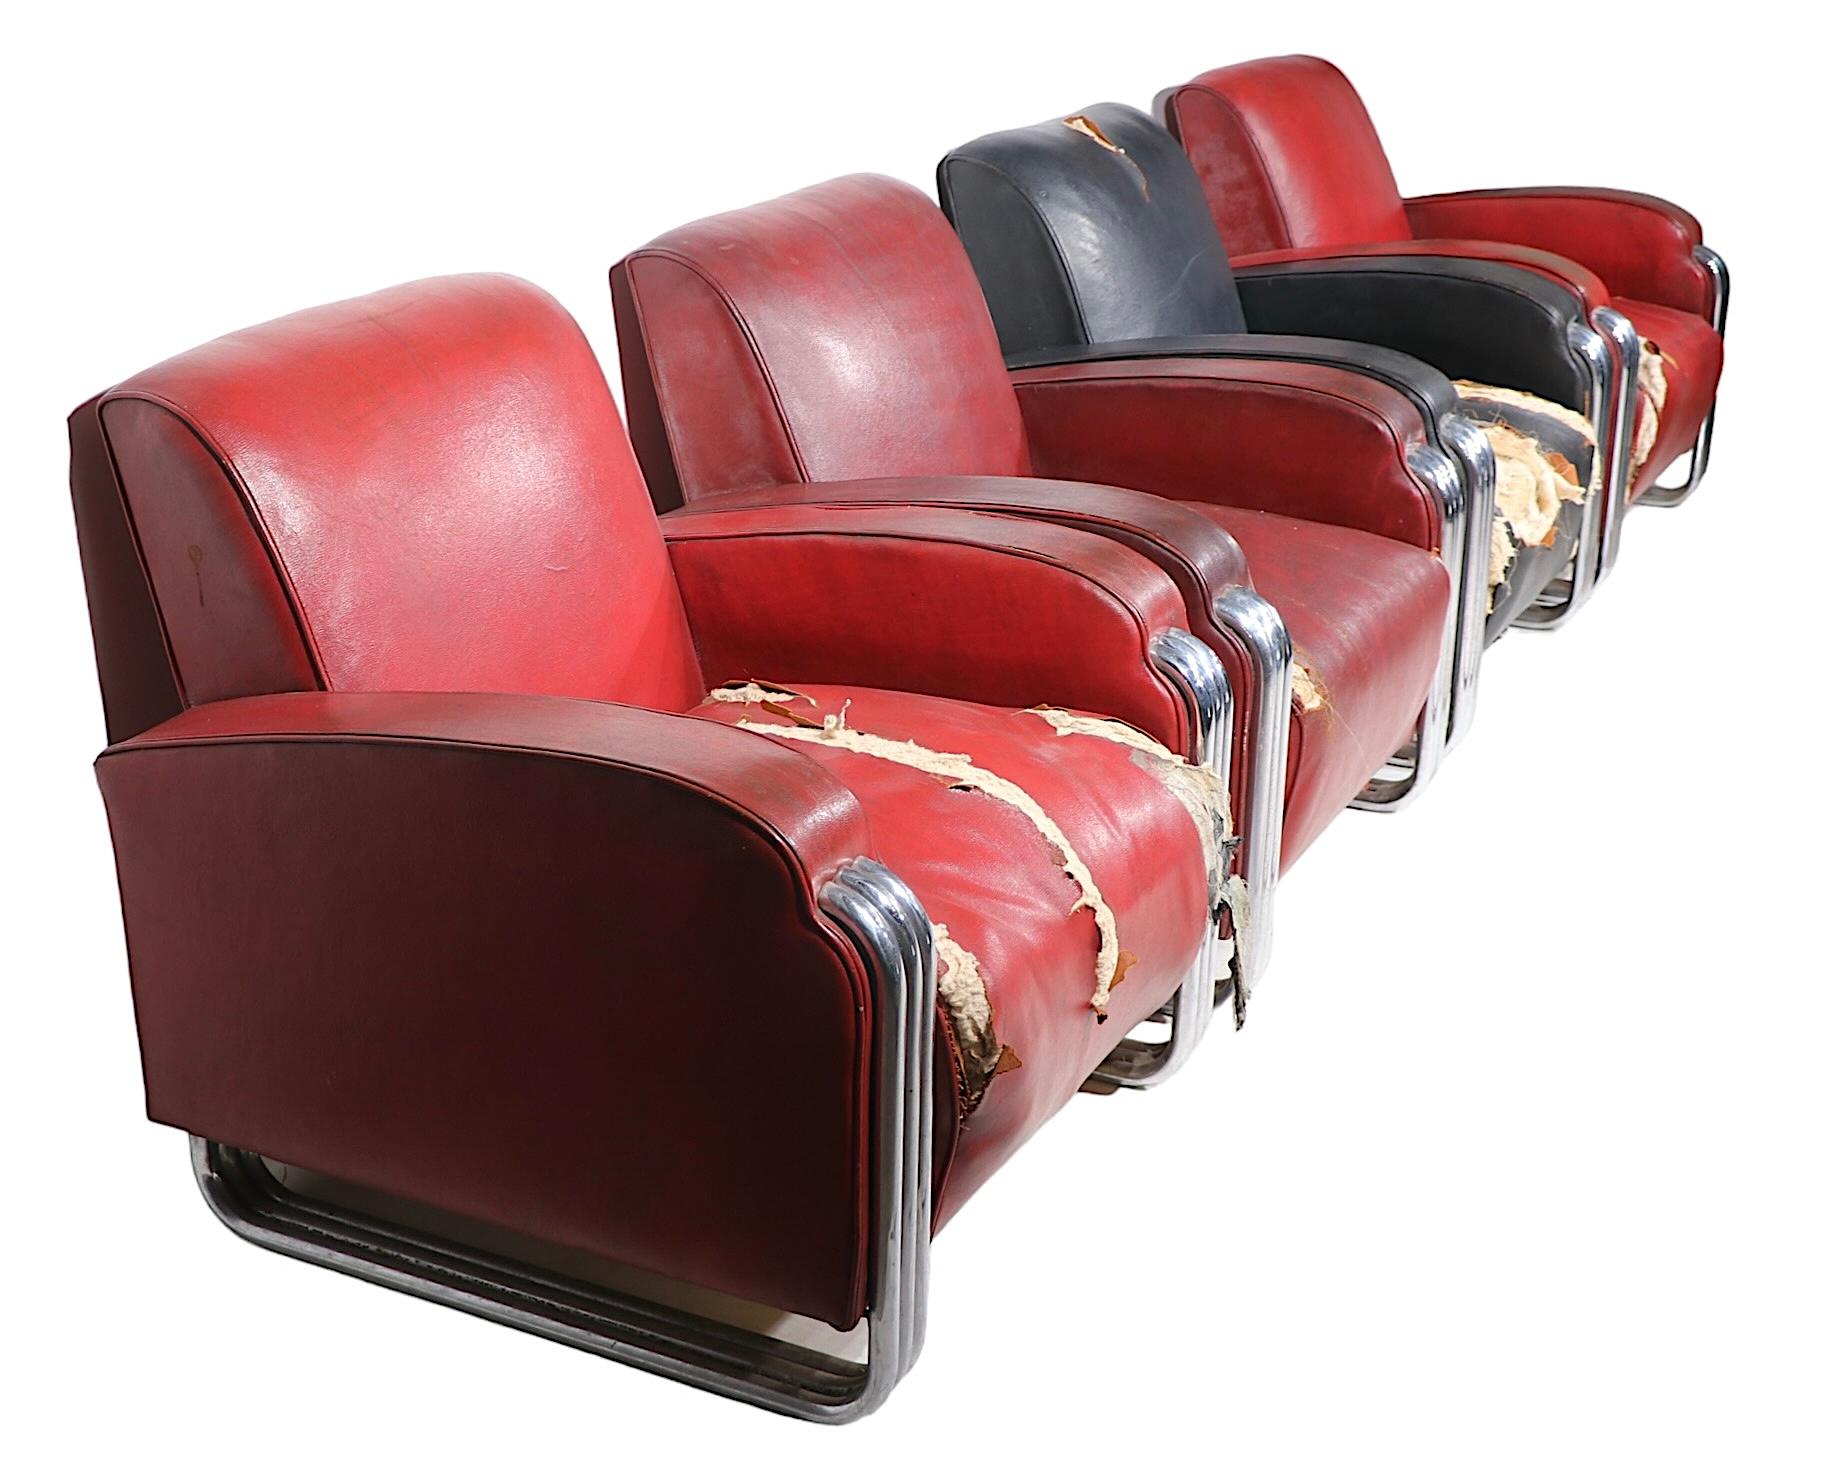  Important Set of Four Triple Band Chrome  Club  Chairs by KEM Webber for Lloyd  For Sale 3